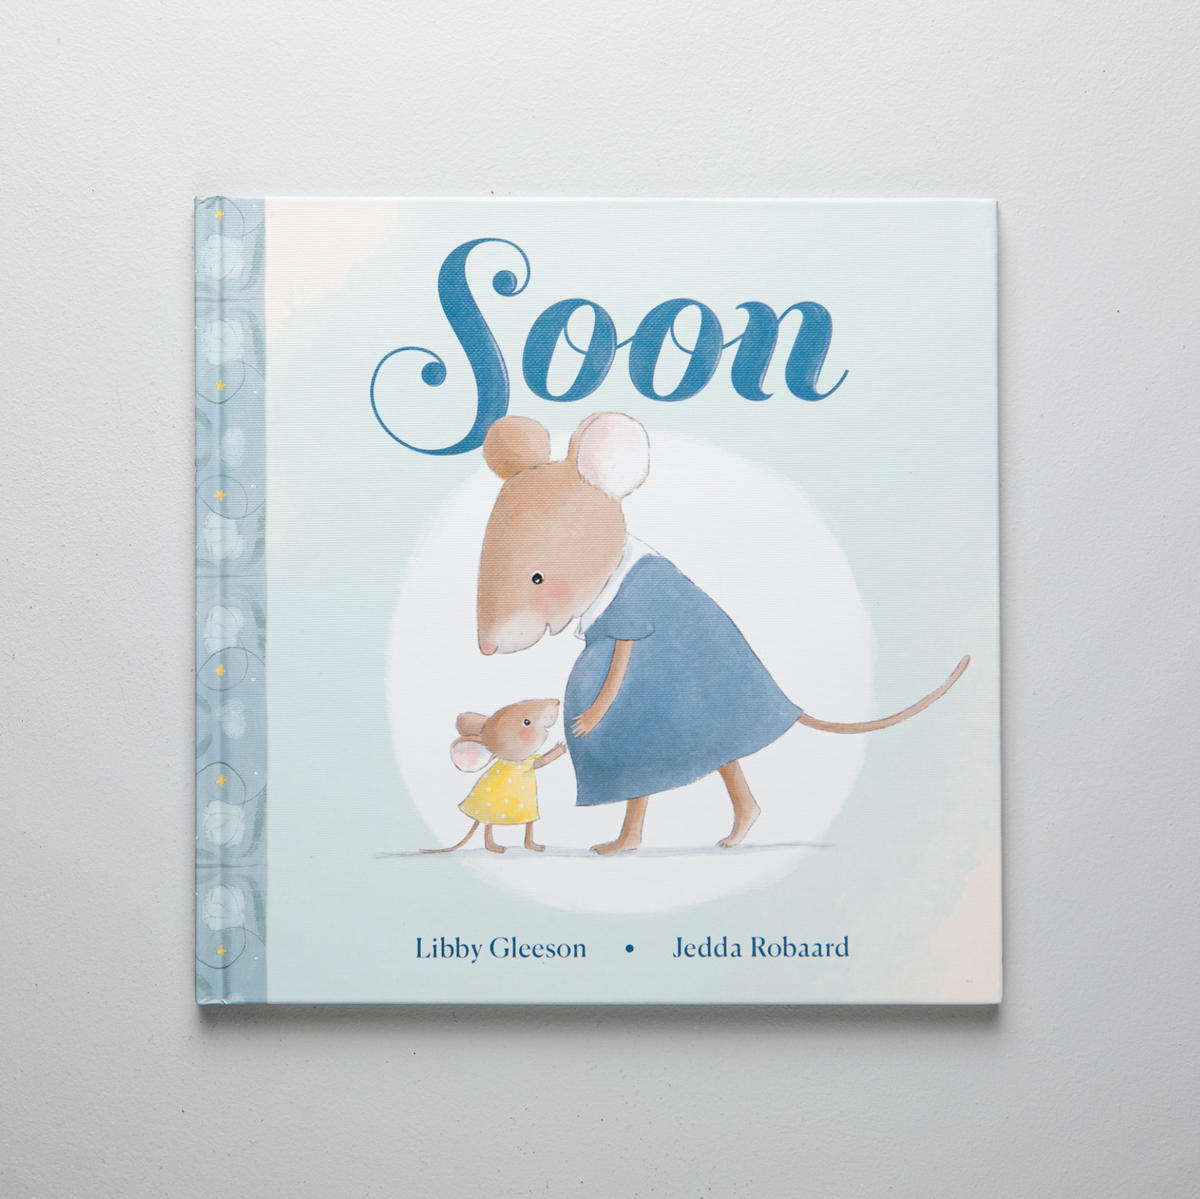 soon baby book by libby gleeson